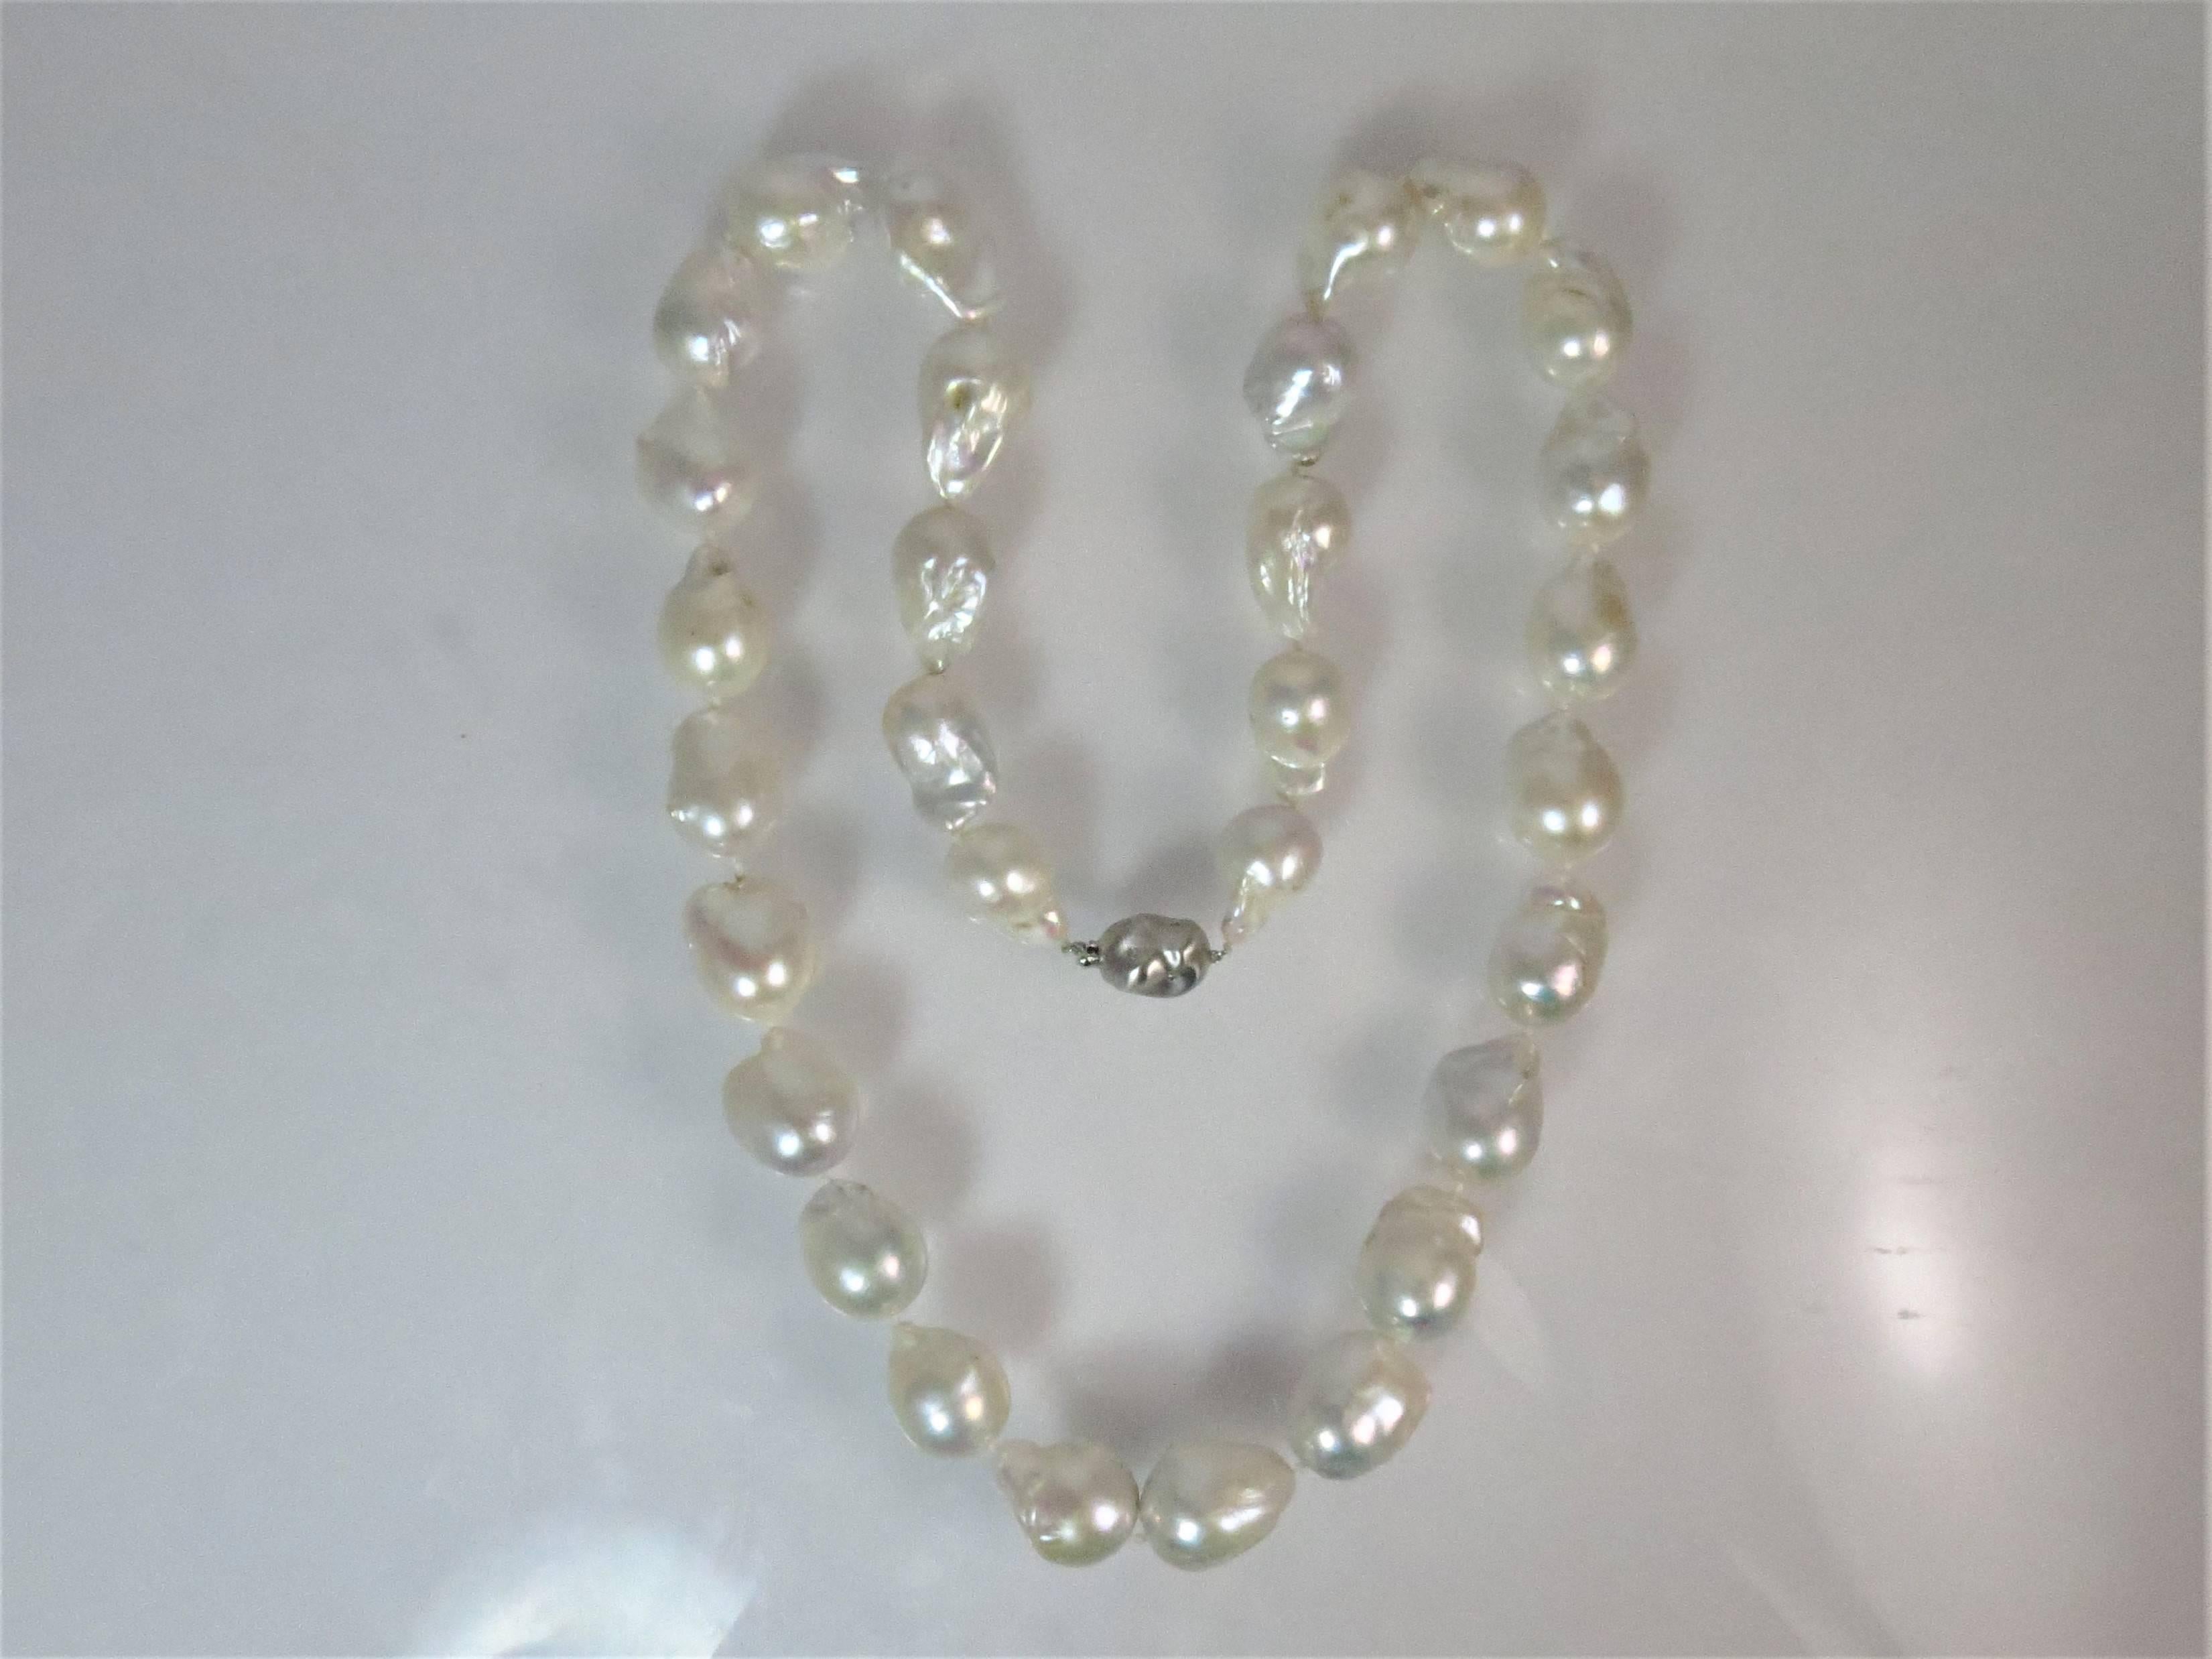 Baroque Freshwater South Sea pearl necklace with 30 Baroque South Sea pearls, 18.8mmx16mm with 14K white gold diamond clasp with 8 single cut, flush set diamonds weighing about .08cts,  HI color, VS clarity. 28 inches long.